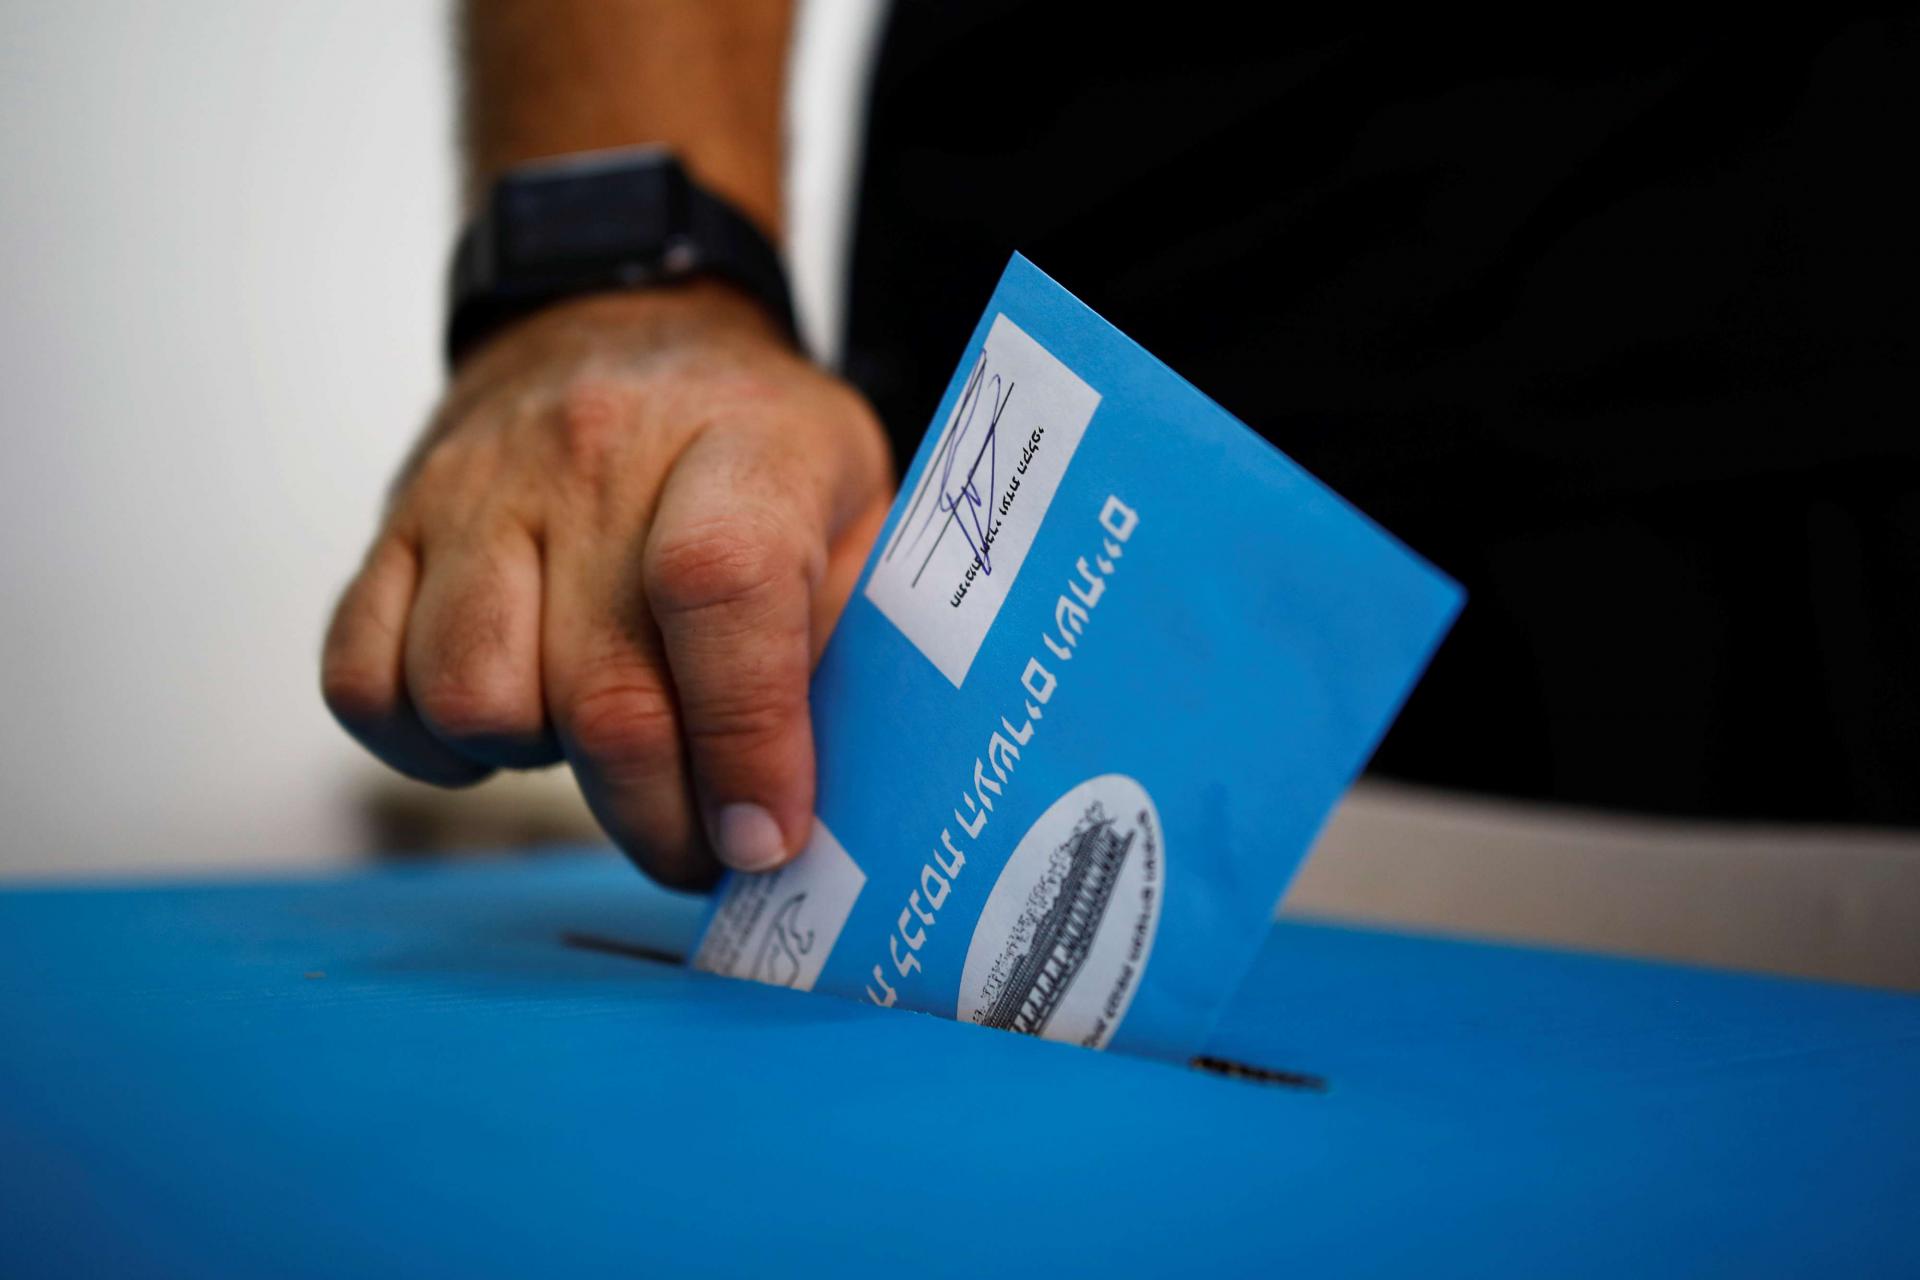 A man votes a poling station in Rosh Haayin, Israel